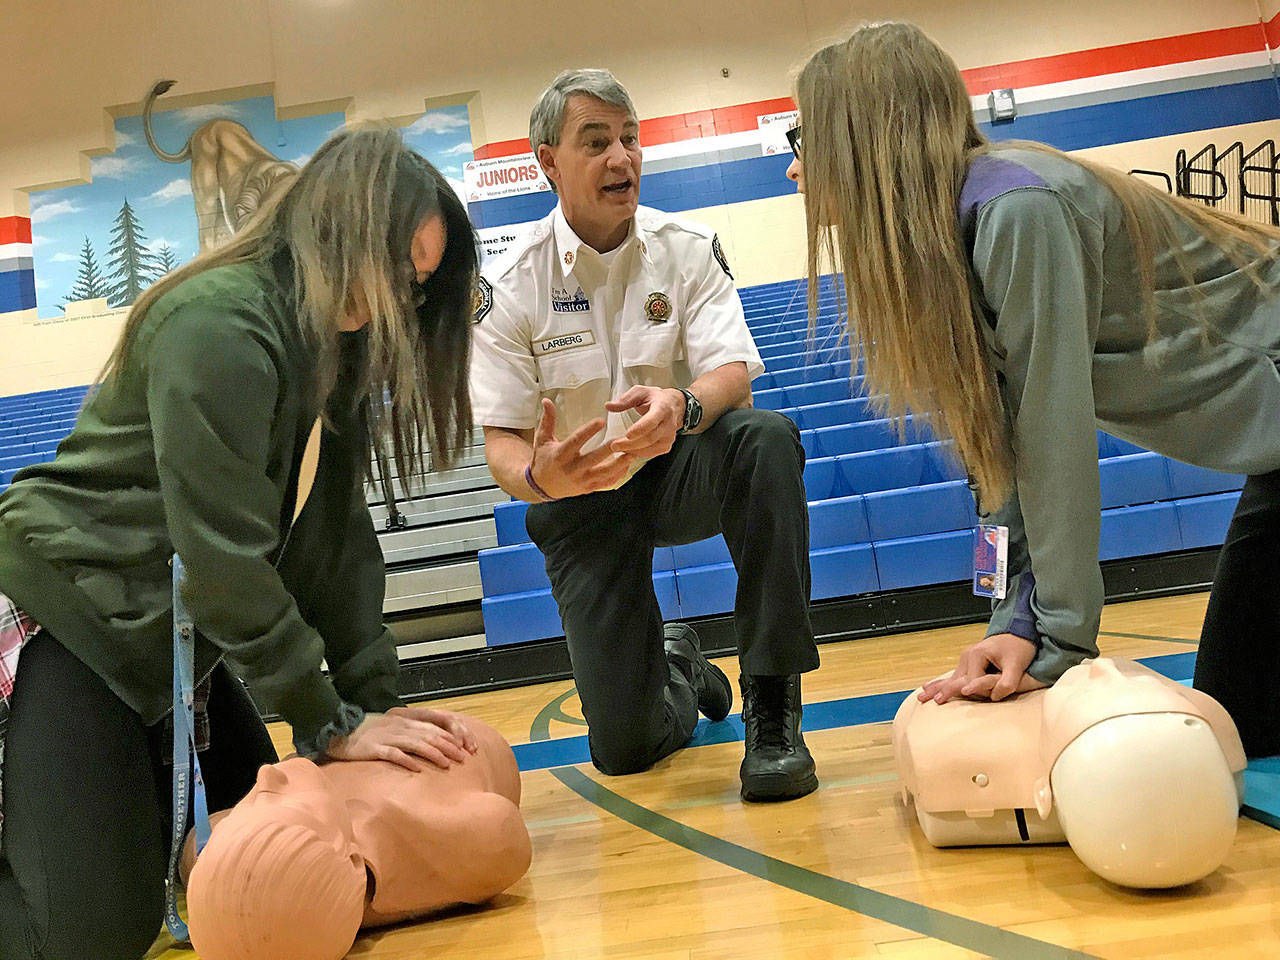 Valley Regional Fire Authority Deputy Chief Dave Larberg gives instruction to Auburn Mountainview High School students Ashley Tran, left, and Makena Madsen during their visit Nov. 27. MARK KLAAS, Auburn Reporter